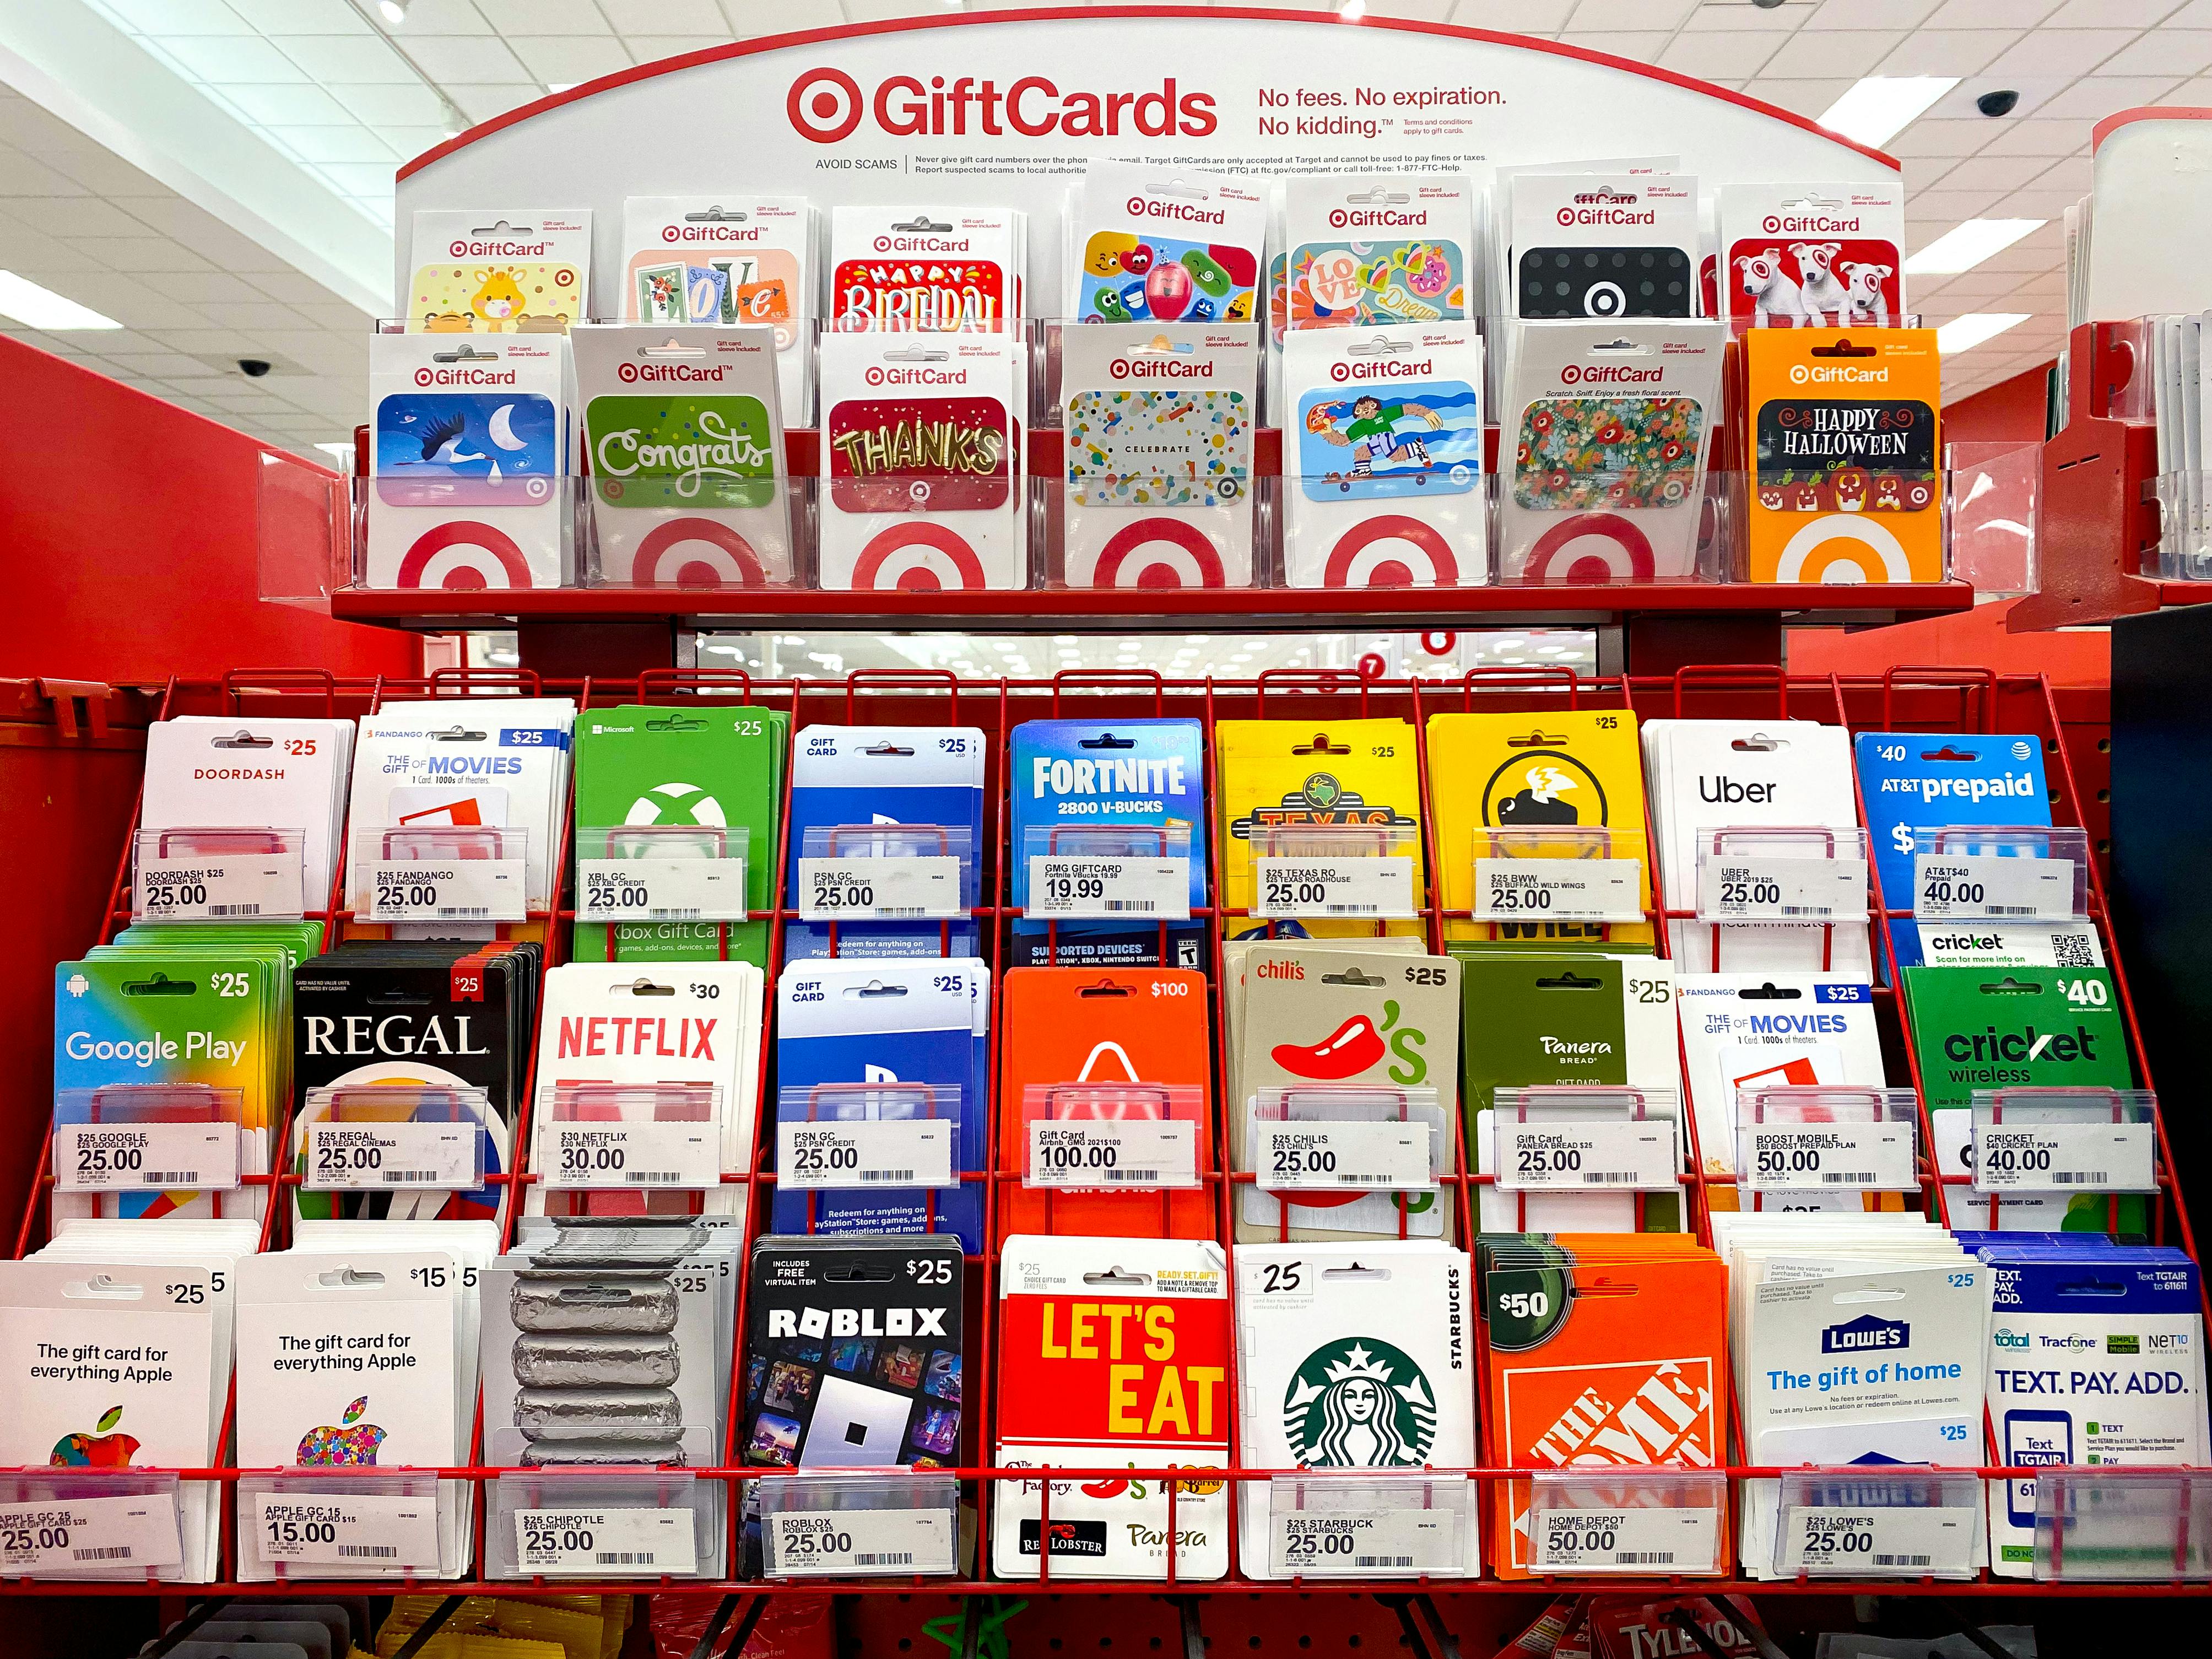 In the digital era, restaurant gift cards are more critical than